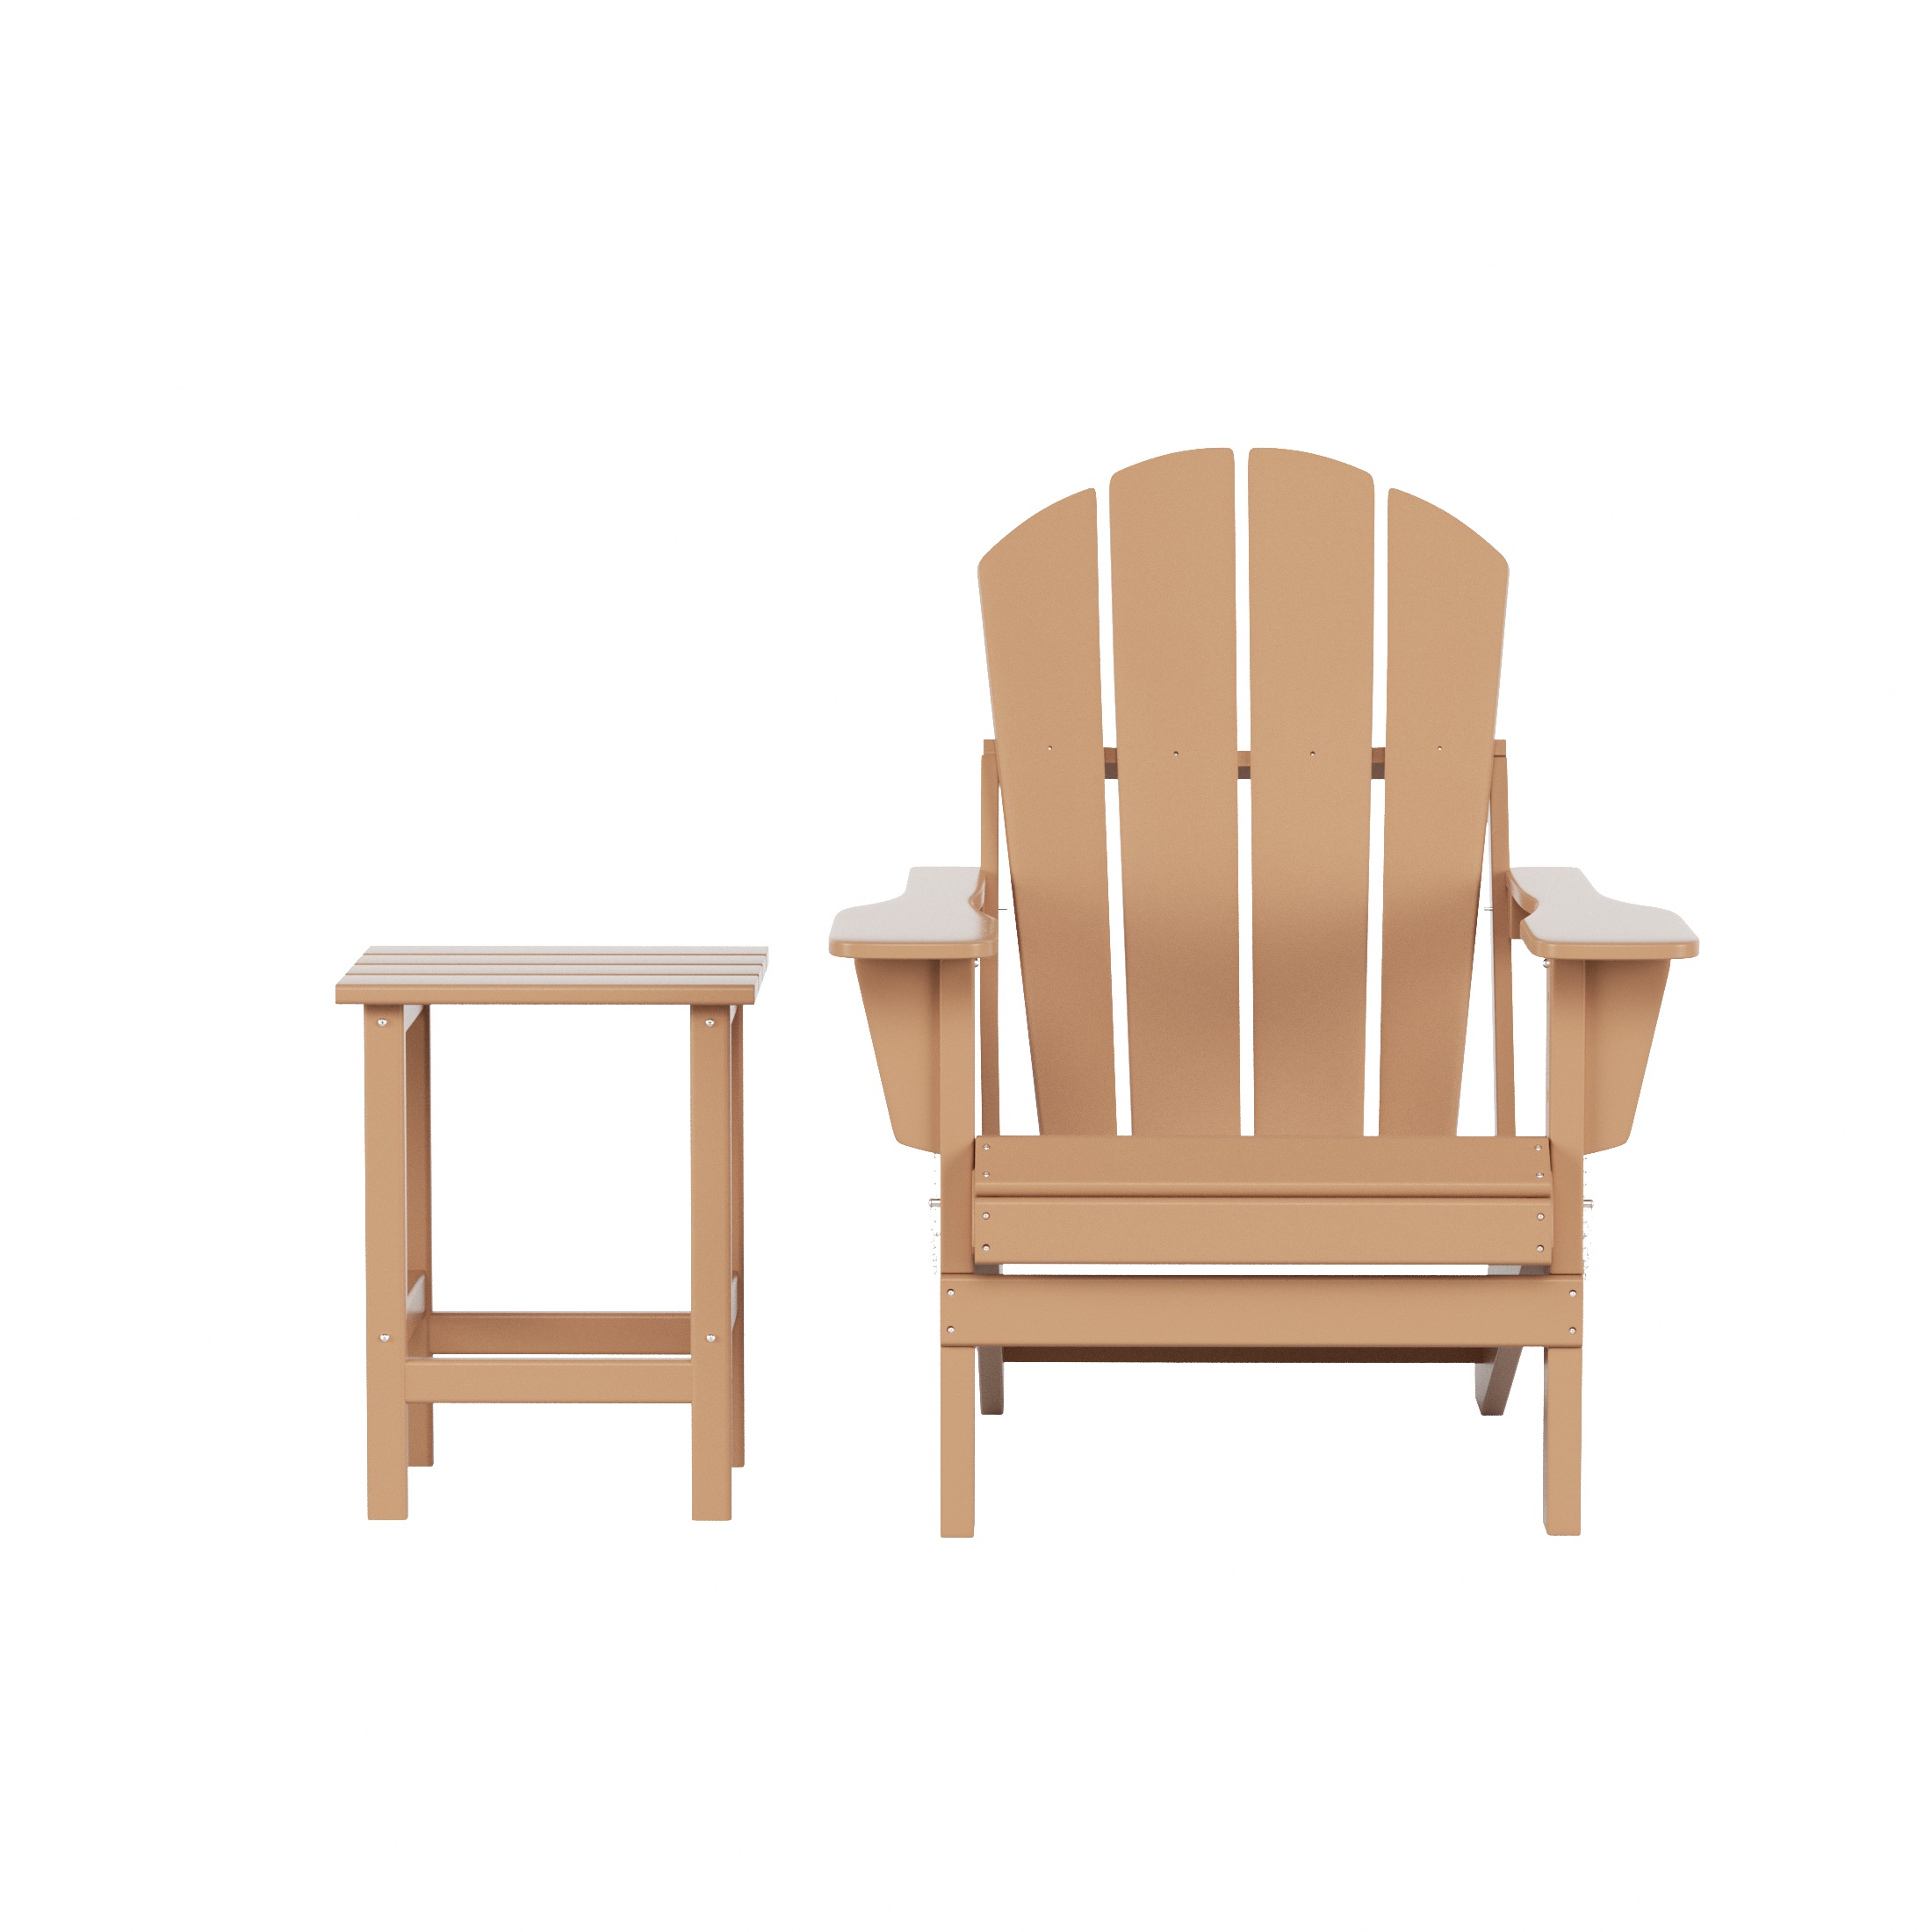 WestinTrends Malibu 2-Pieces Adirondack Chair Set with Side Table, All Weather Outdoor Seating Plastic Patio Lawn Chair Folding for Outside Porch Deck Backyard, Teak - image 4 of 7